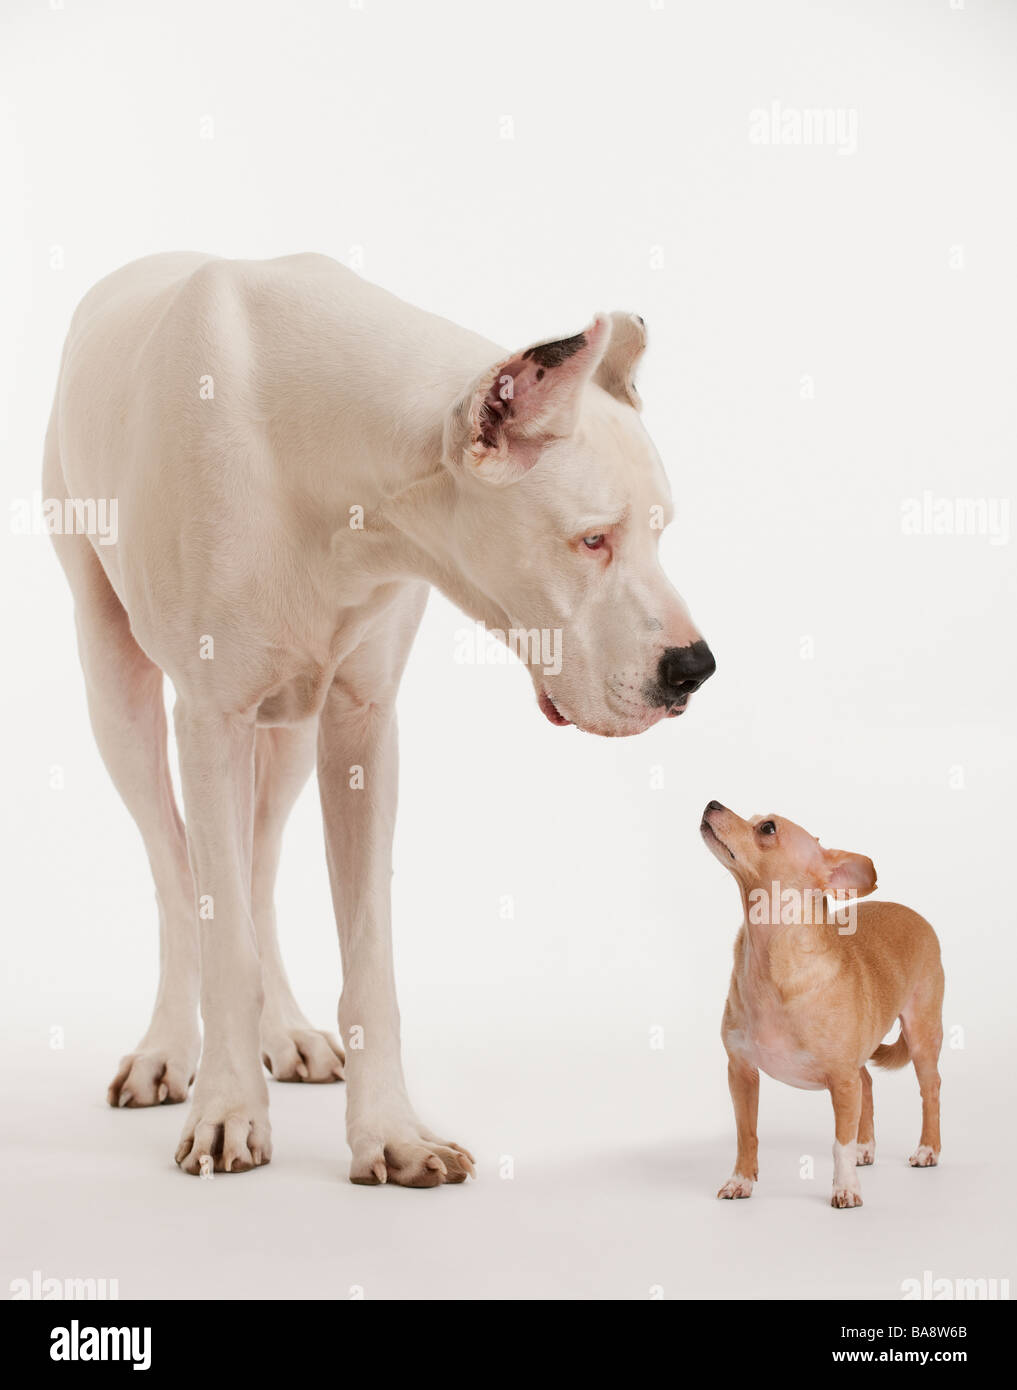 Small and large dogs looking at each other Stock Photo